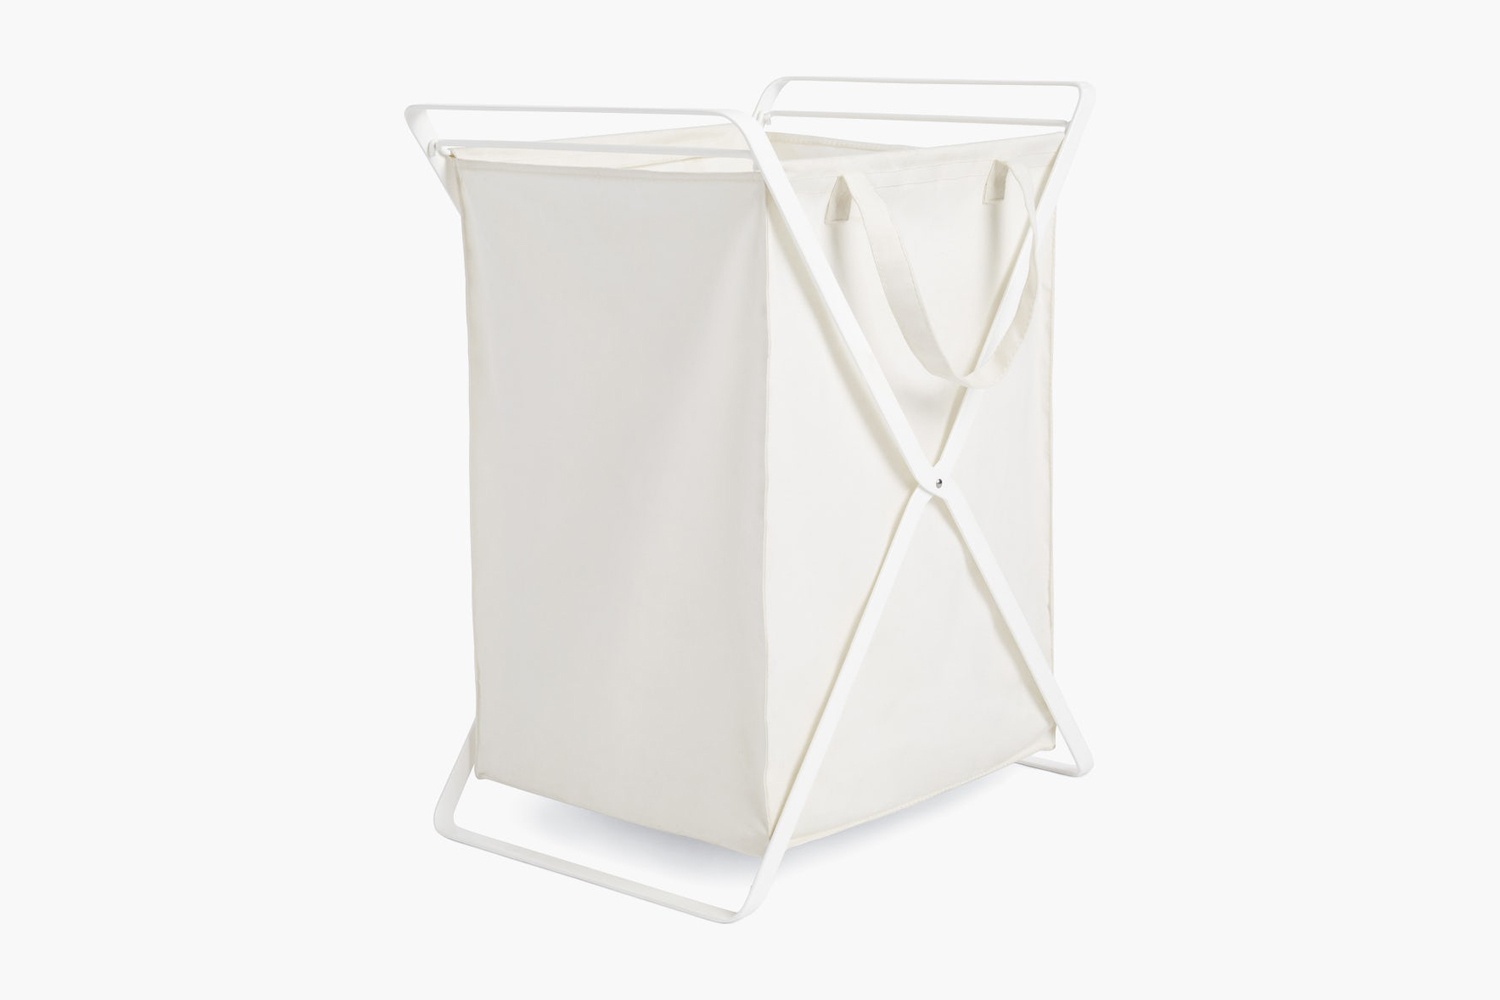 the yamazaki home tower laundry hamper is $100 at design within reach. 19